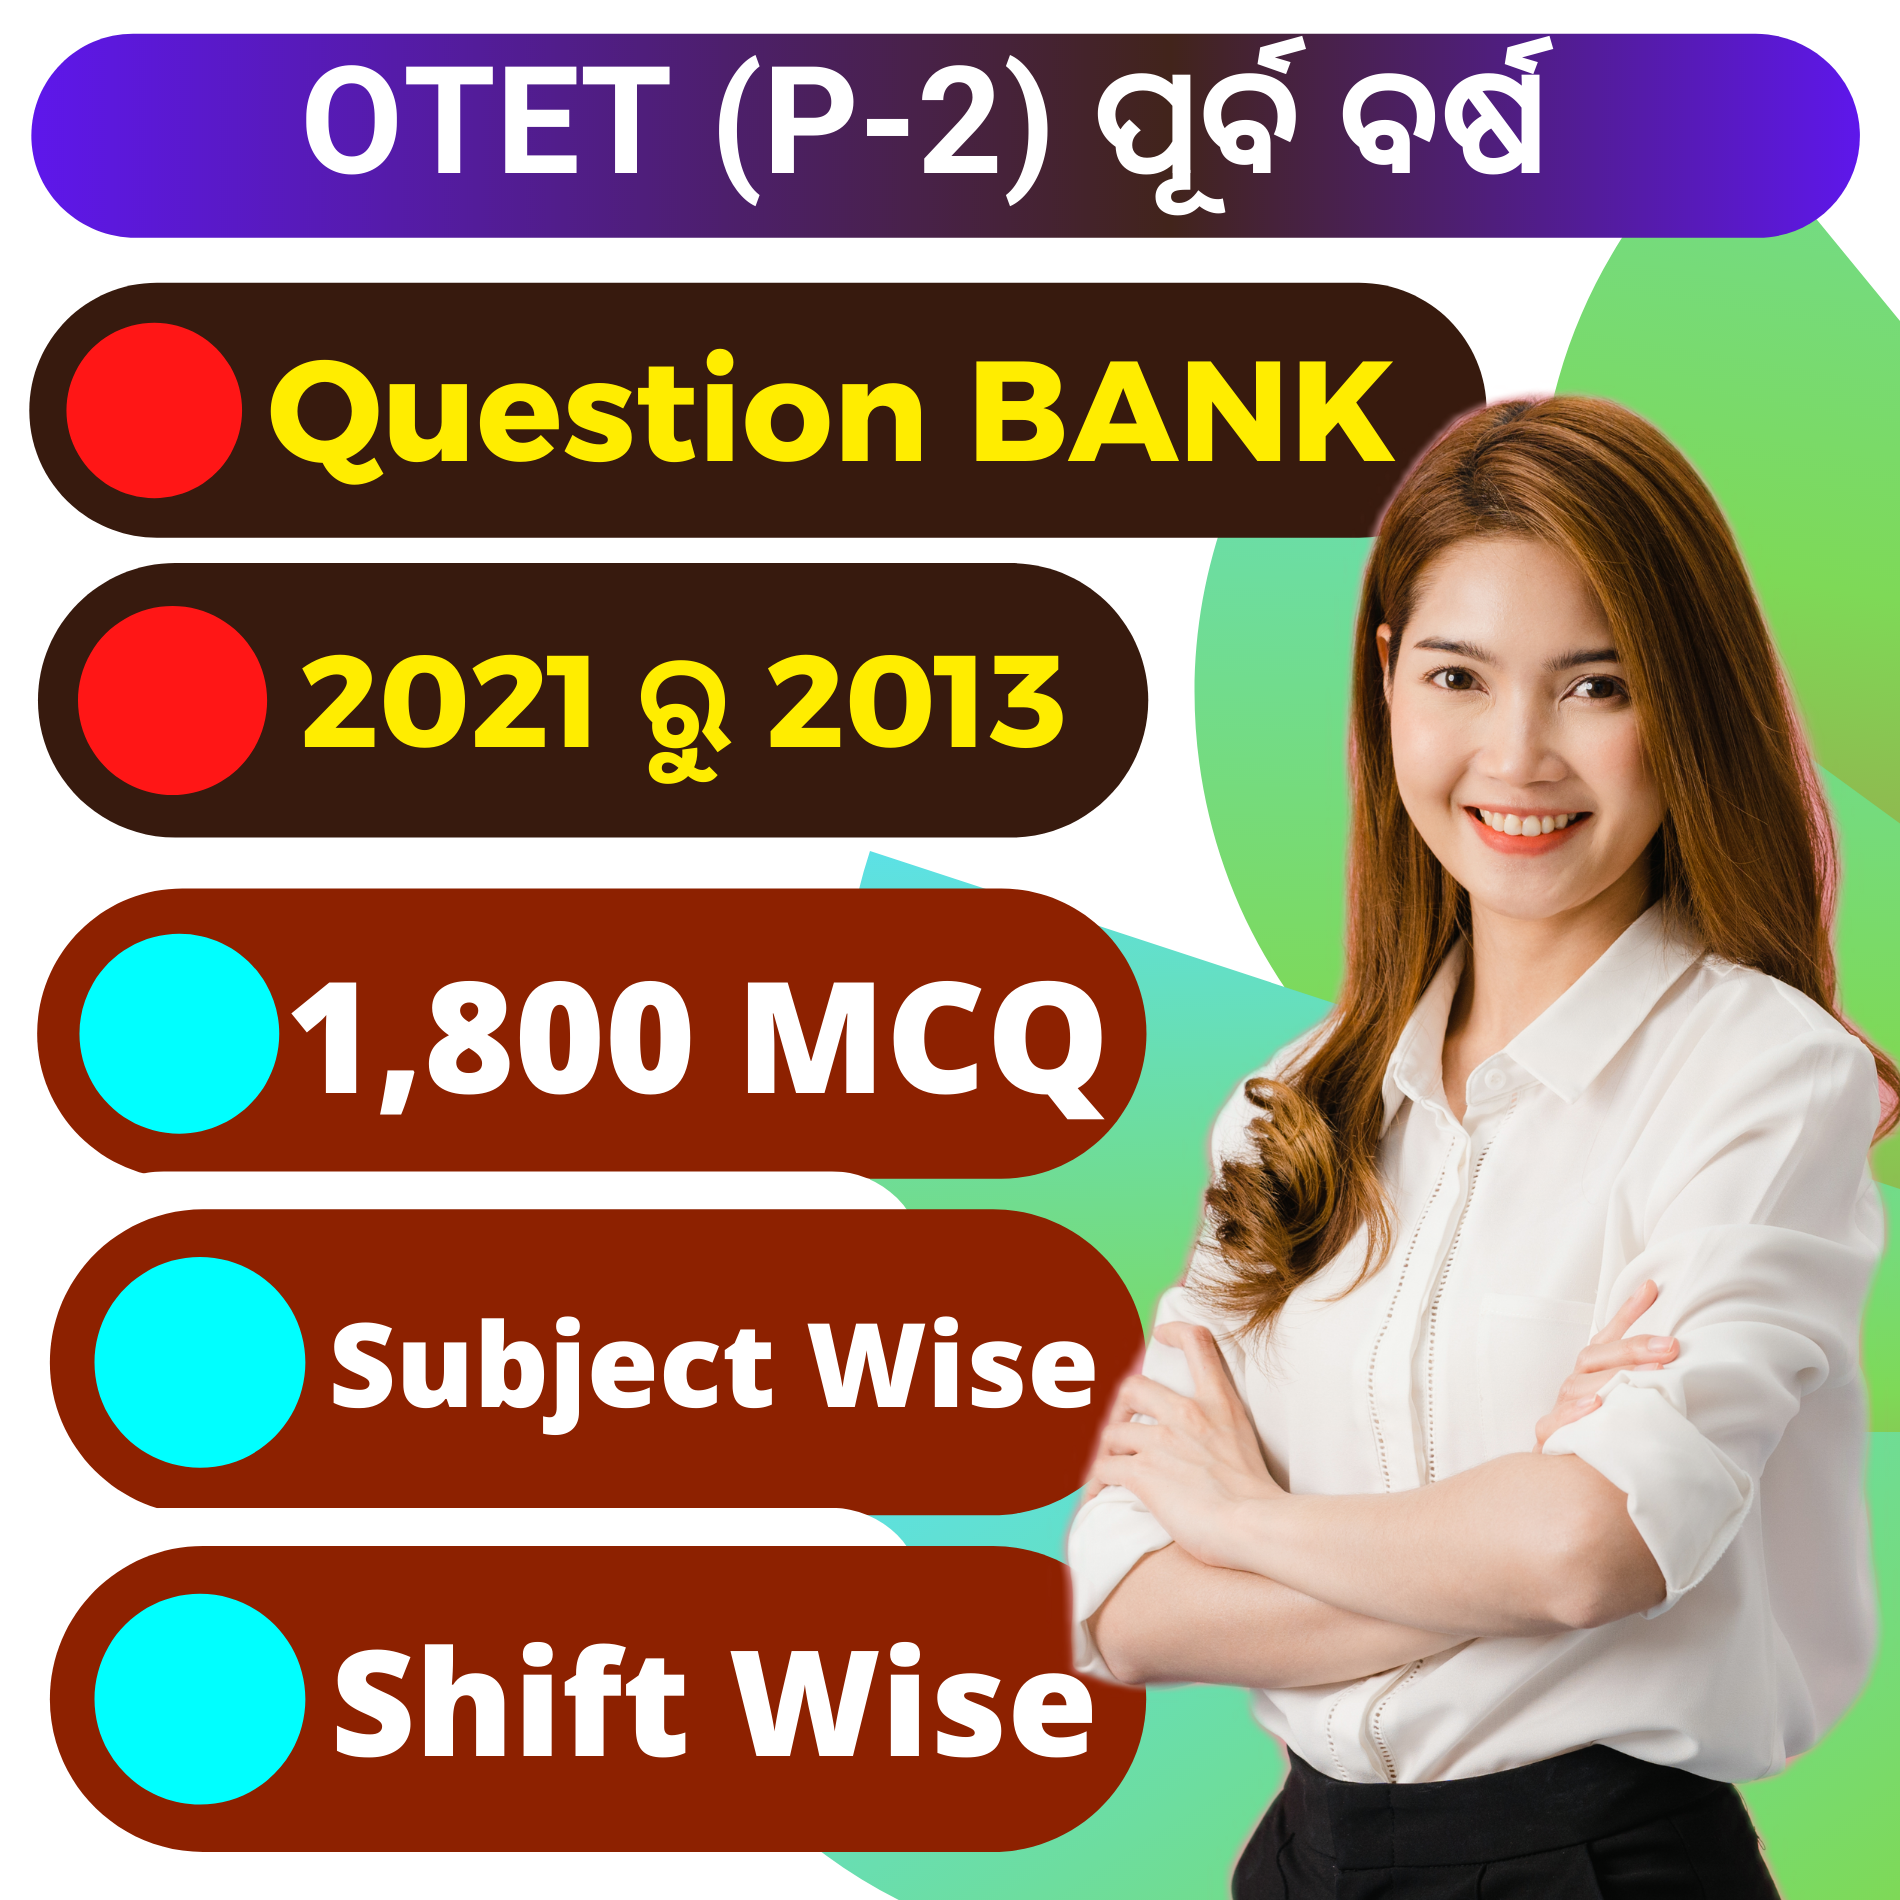 C- OSSSC PEO & JA 2023 !! E-BOOK (PDF) 20,000 BEST MCQ !! CHAPTER WISE LAST 5 Years ALL QUESTIONS & ANSWER